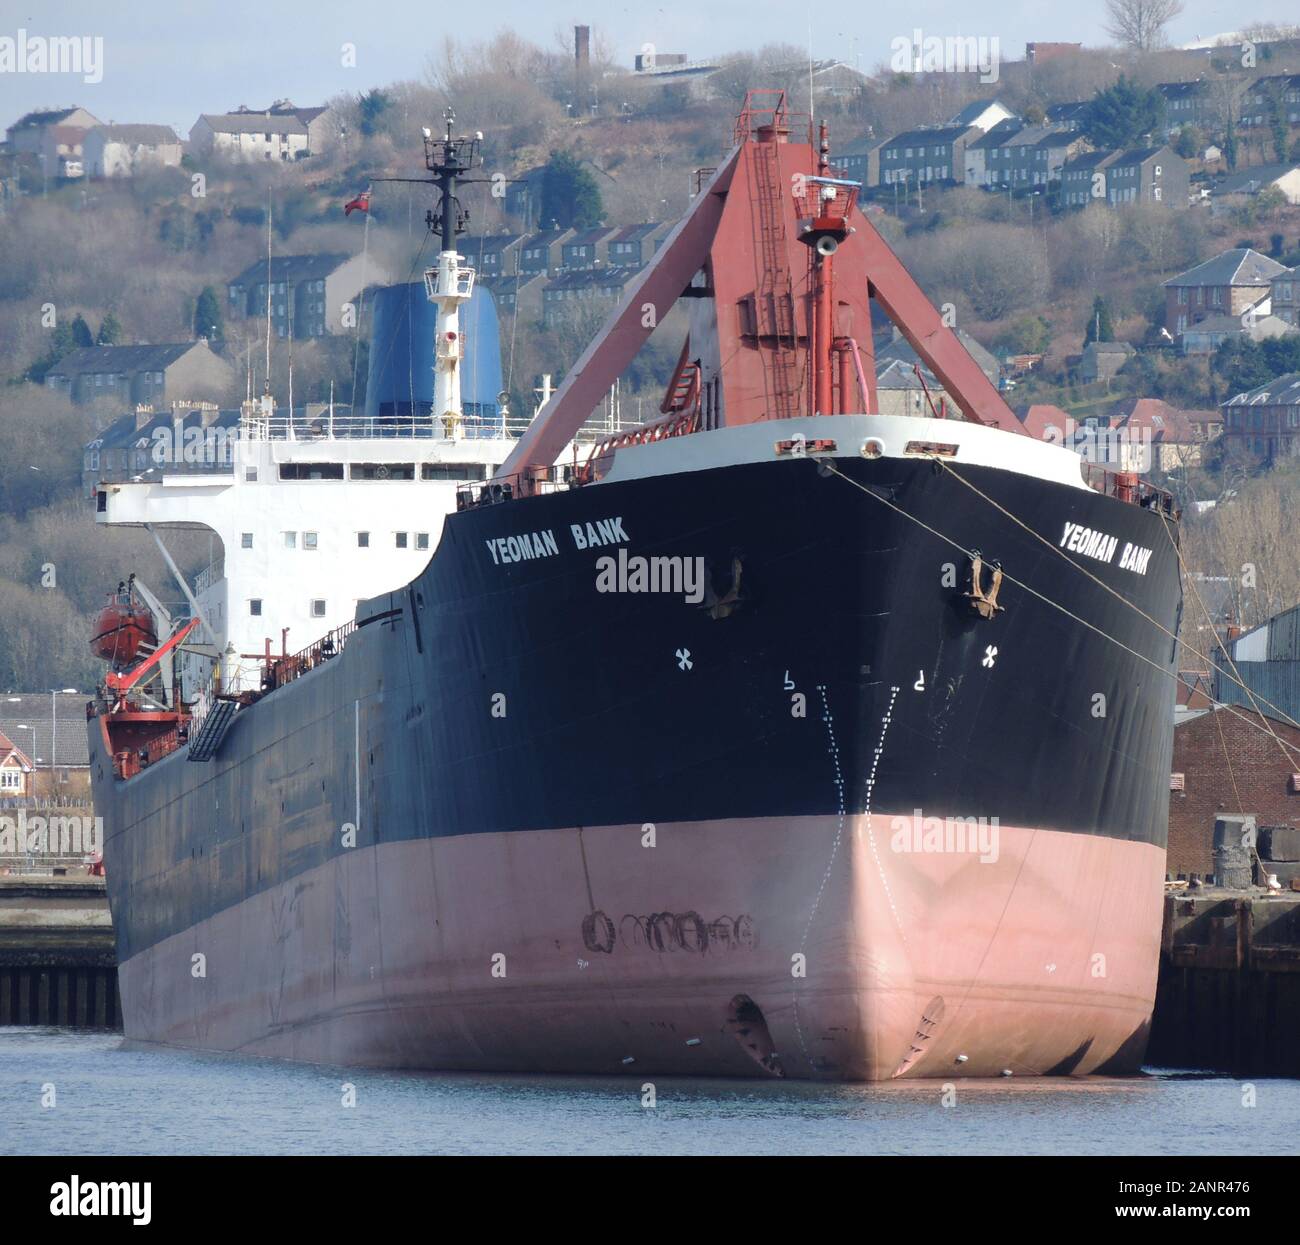 The Liberian-registered bulk carrier Yeoman Bank, at Inchgreen dock in Greenock, for emergency bow thruster repairs. Stock Photo